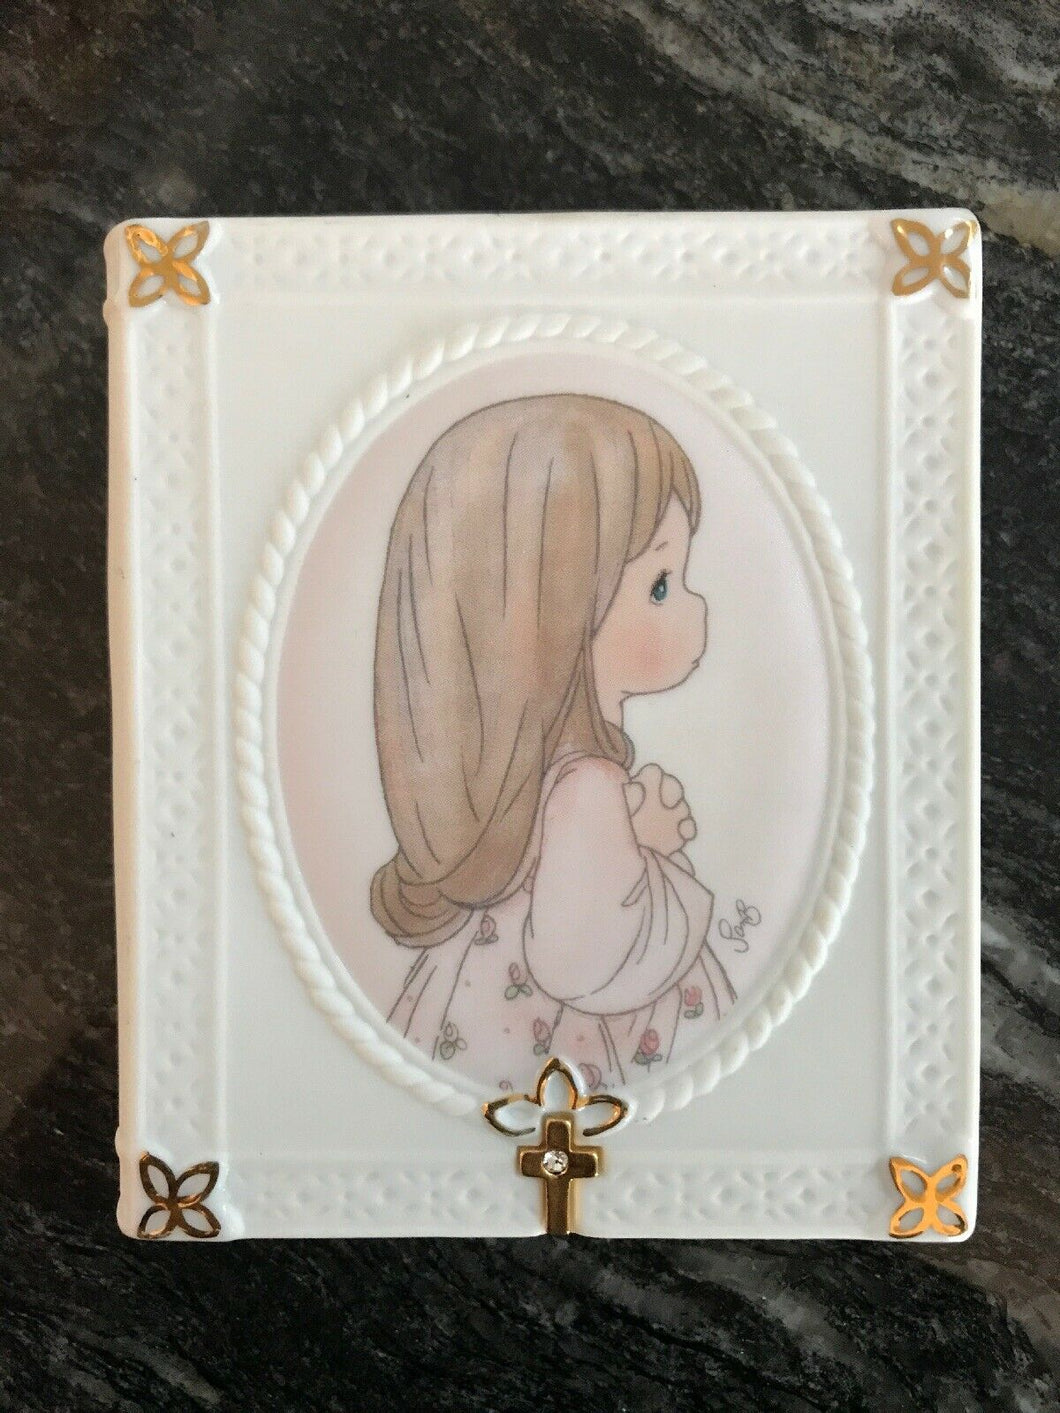 Precious moments confirmation bible holder - religious gifts in Canada